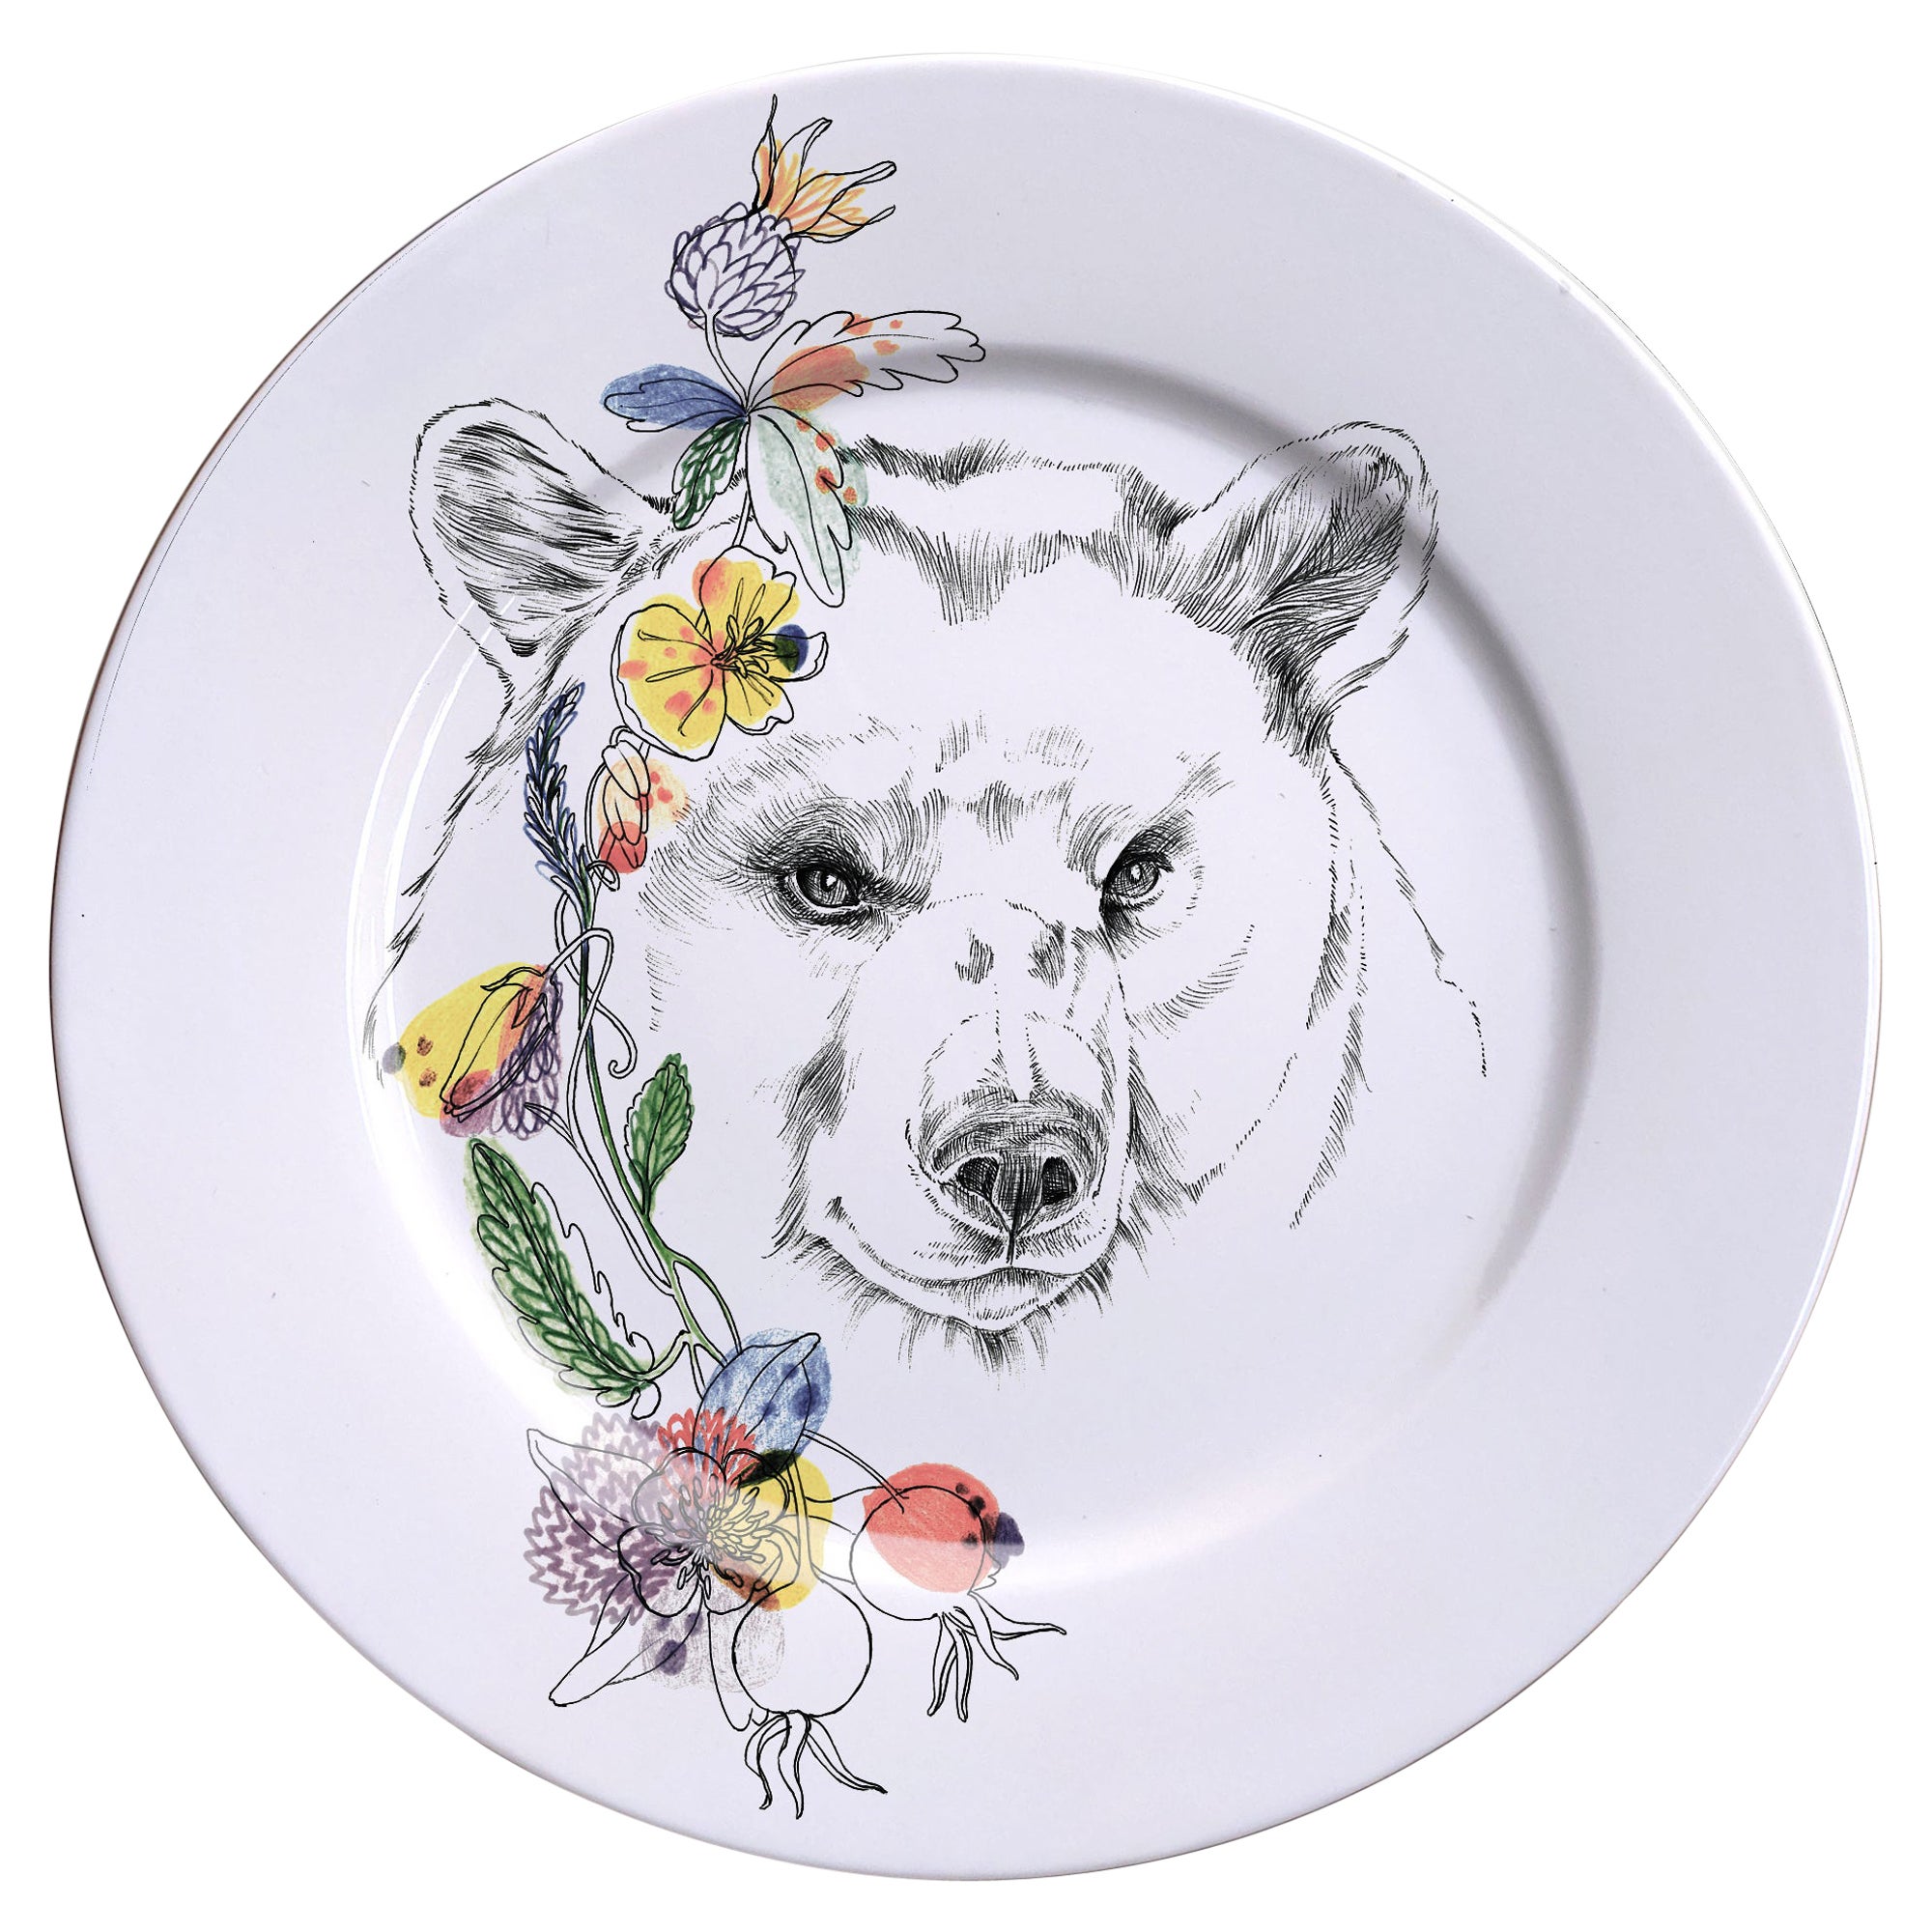 Ode to the Woods, Contemporary Porcelain Dinner Plate with Bear and Flowers For Sale